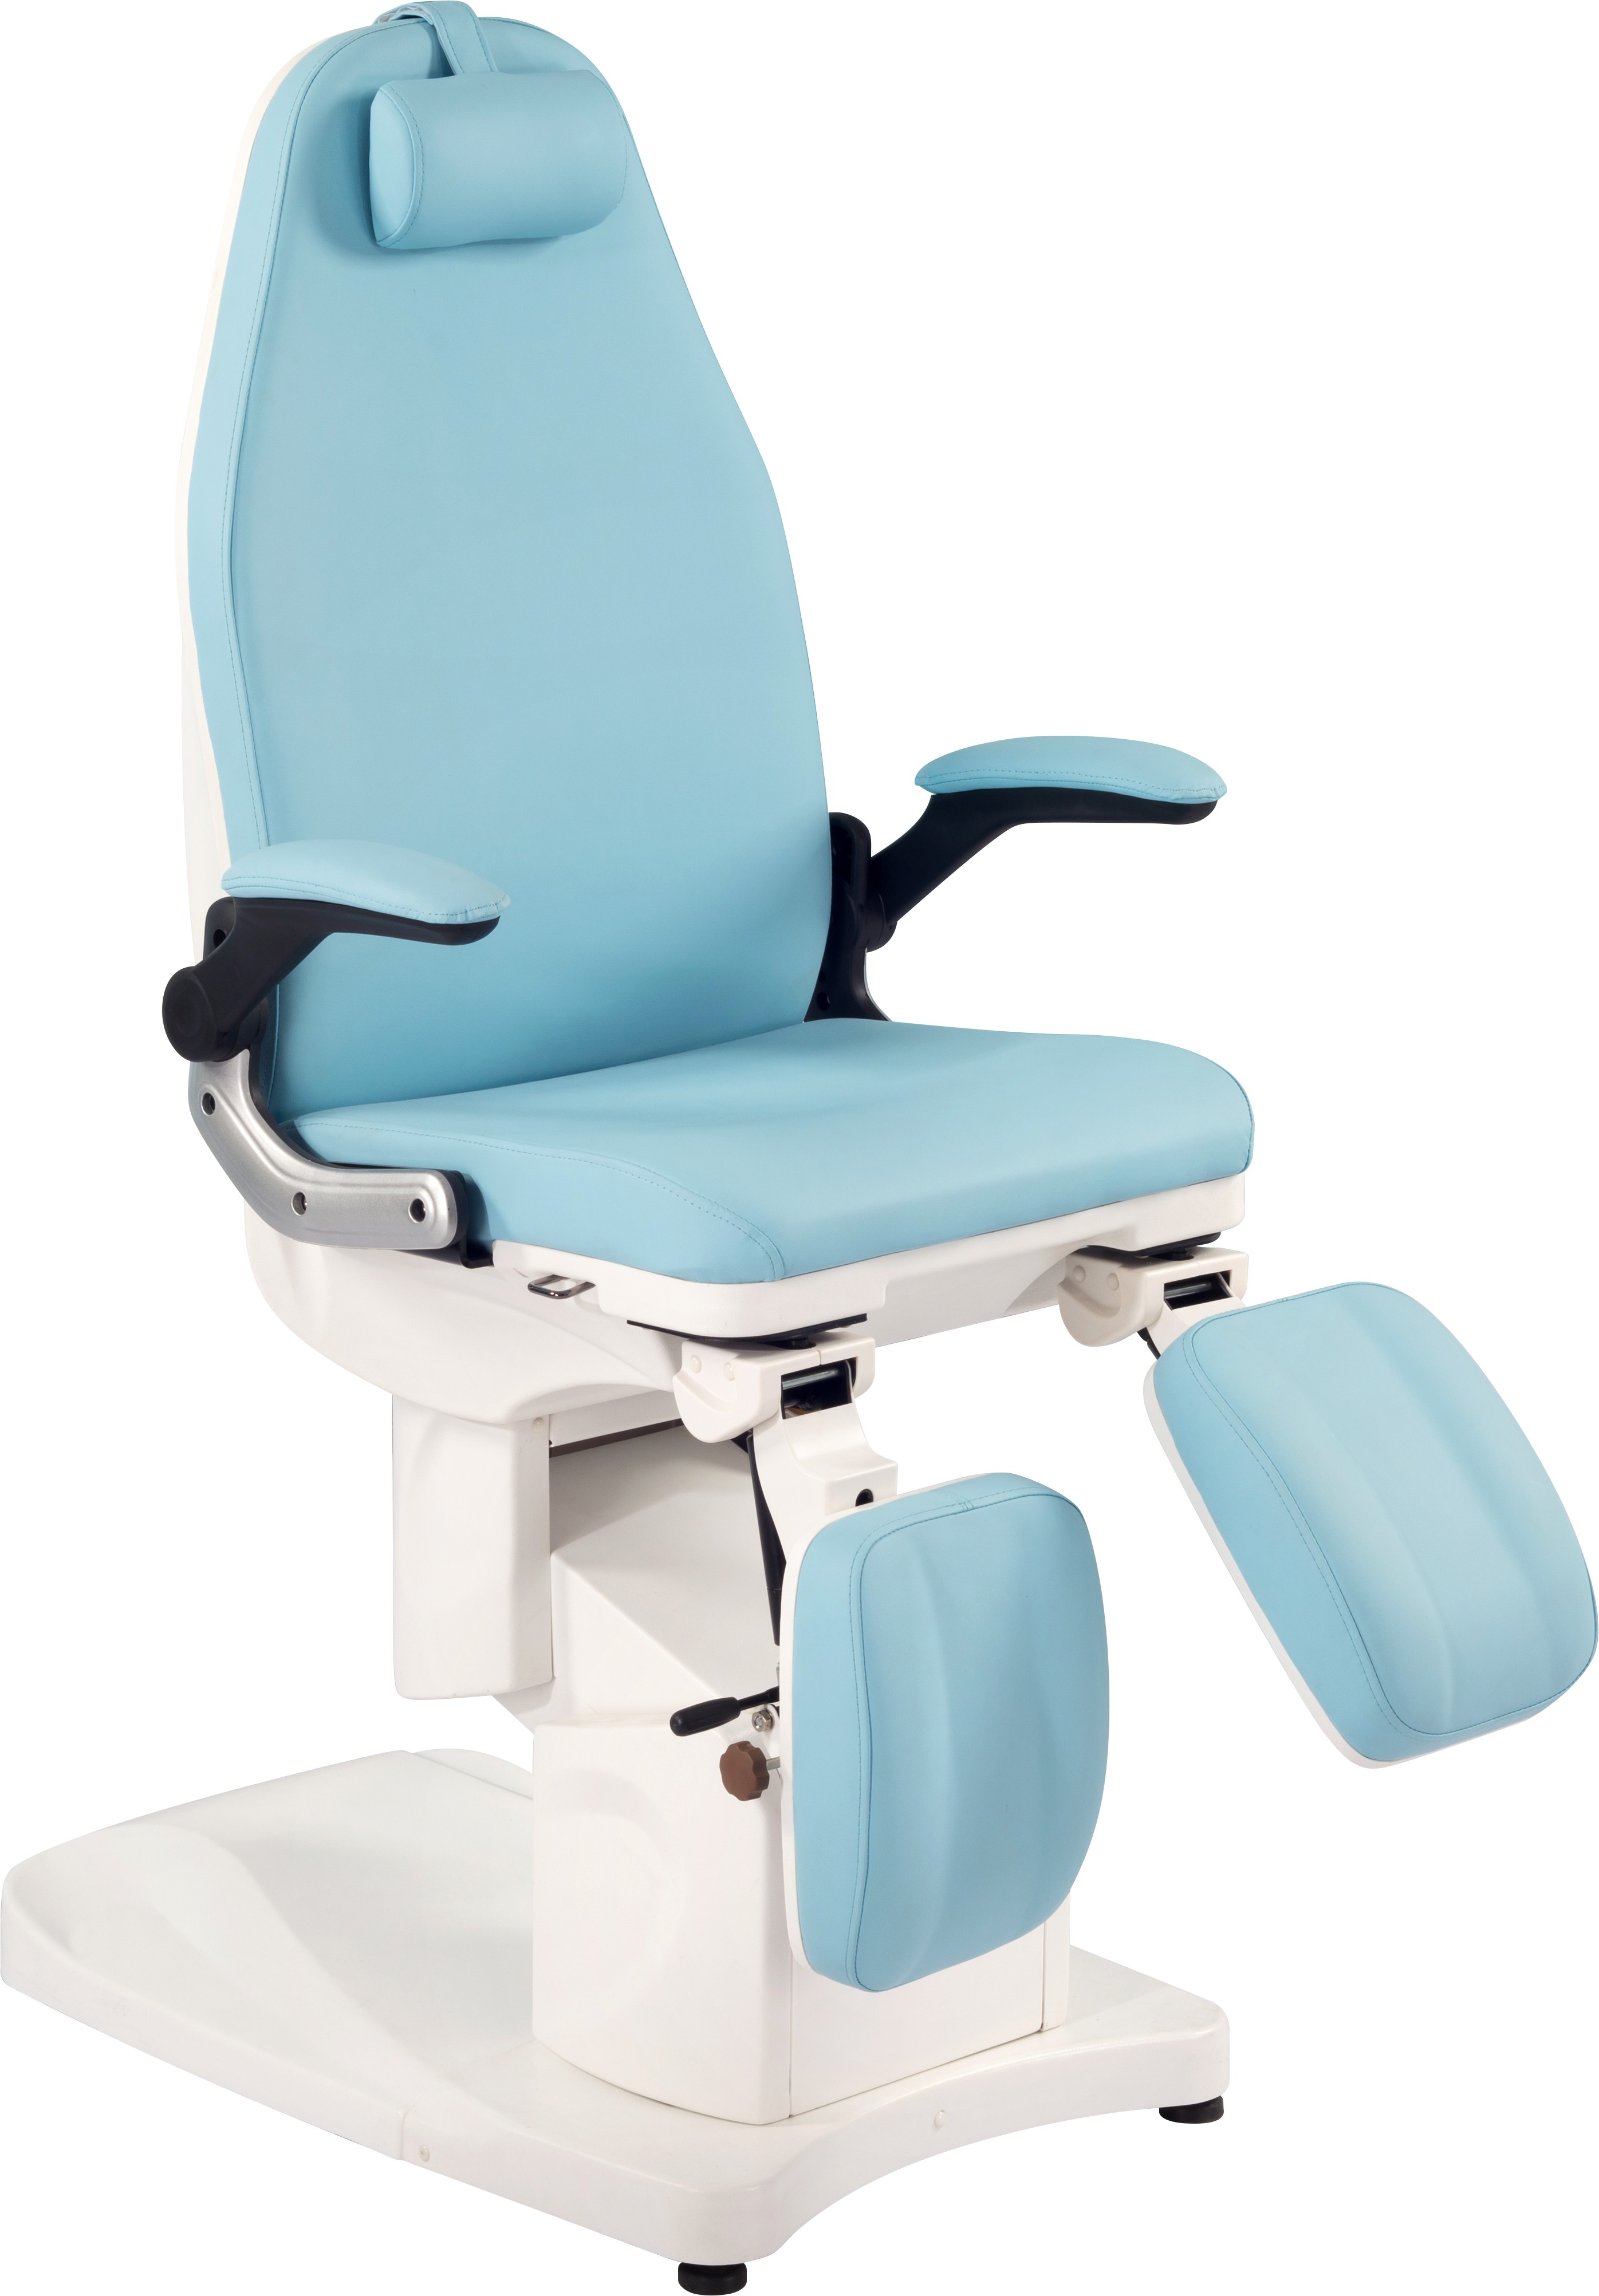 Pipeless Pedicure chair Wholesale of nail salon spa massage chair pedicure foot massage chair suppliers